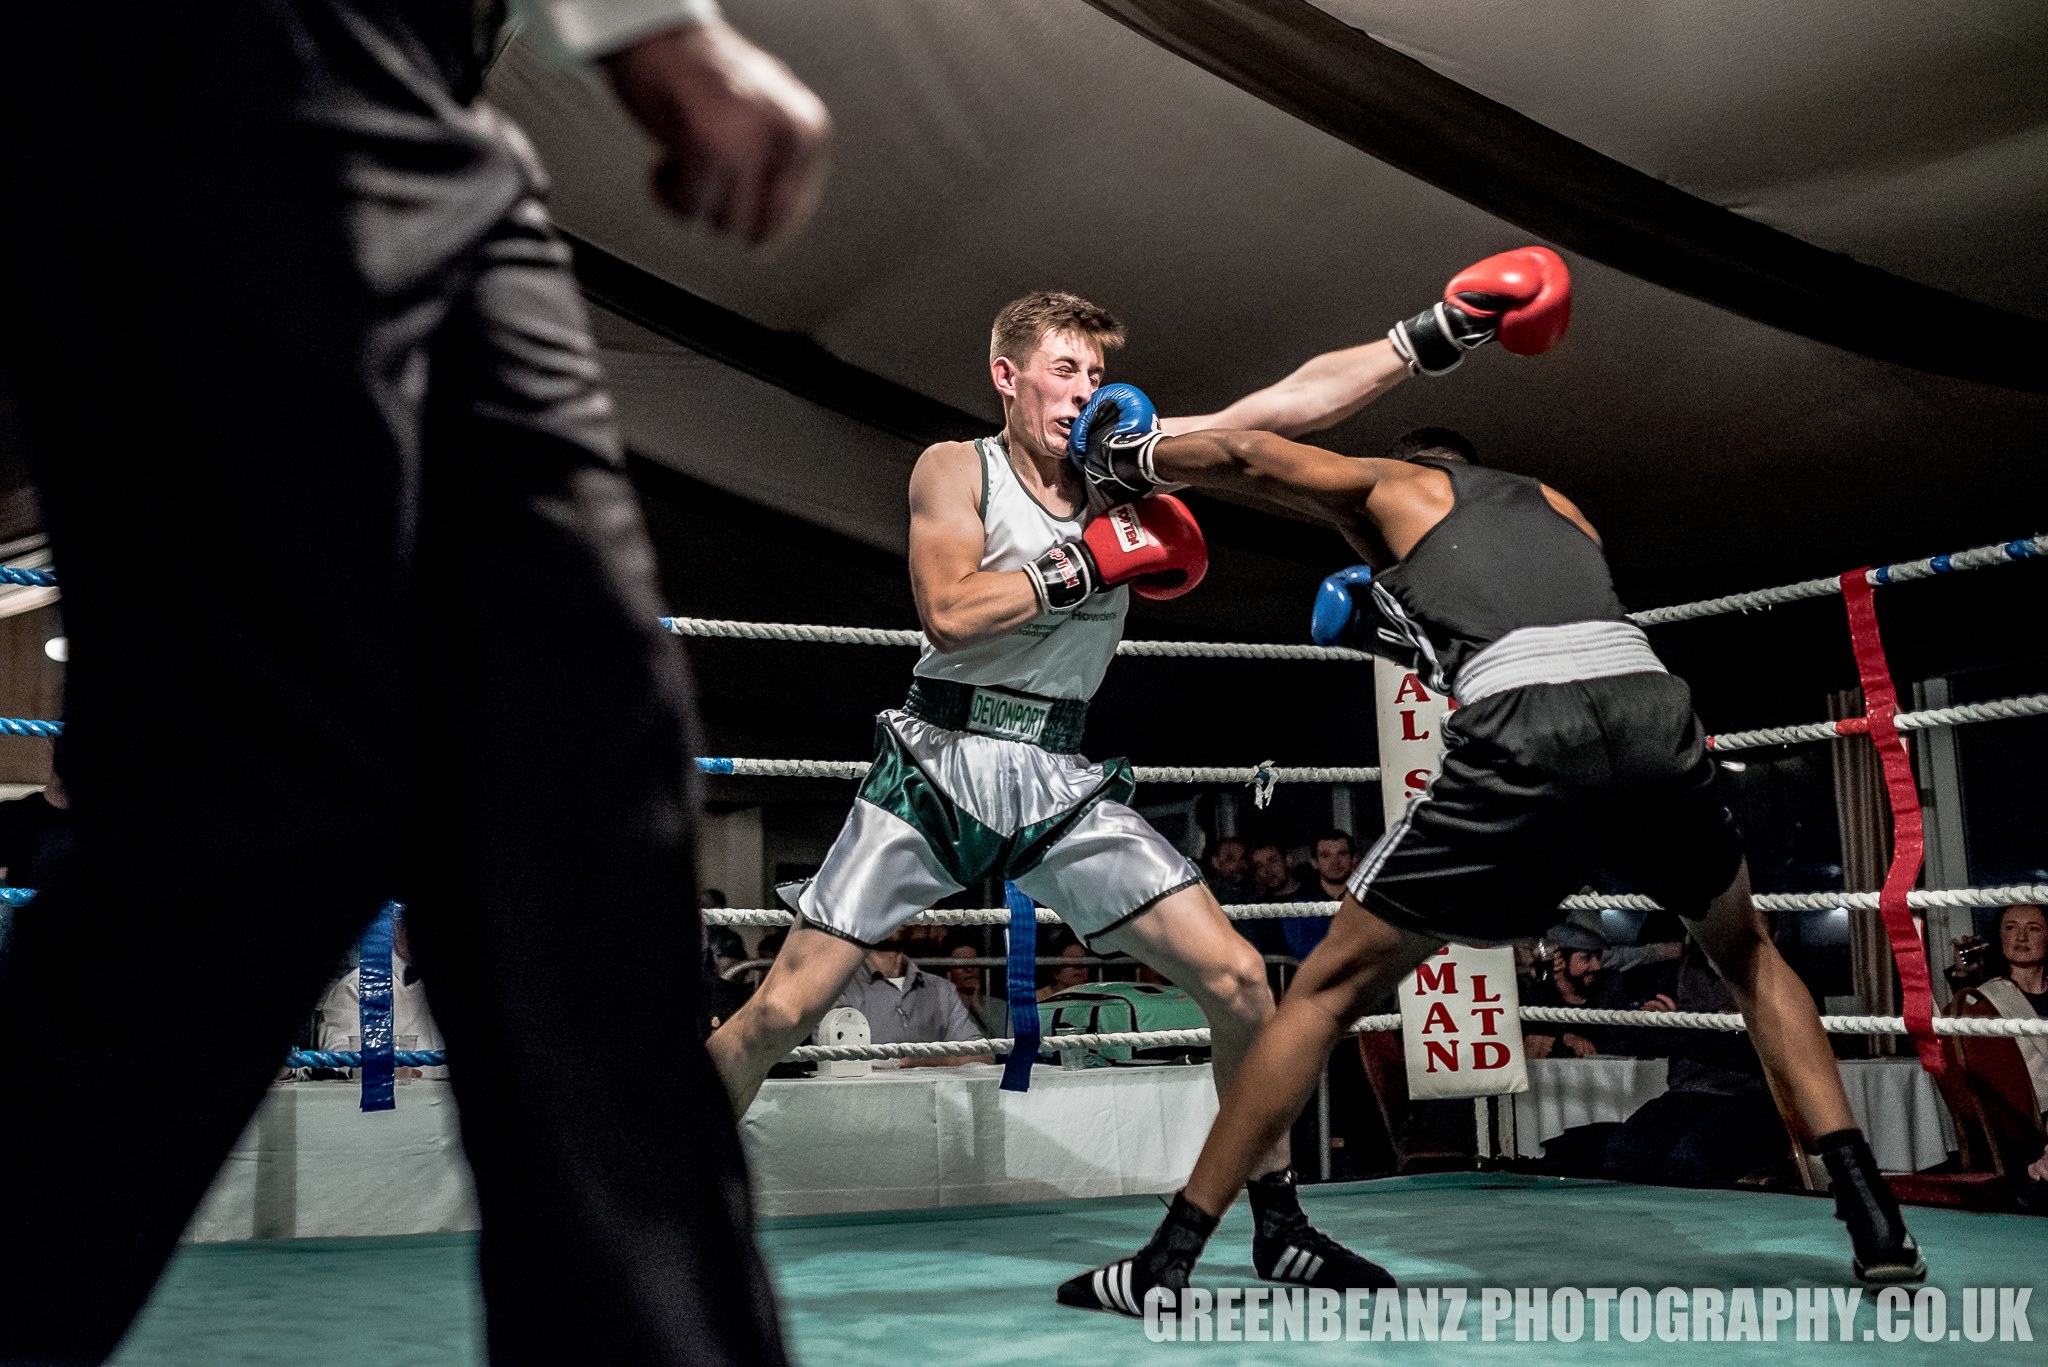 Dale Moore and Michael Mashaya Boxing at a Devonport Amateur Boxing Club Show at Plymouth Albion Rugby Club in 2018